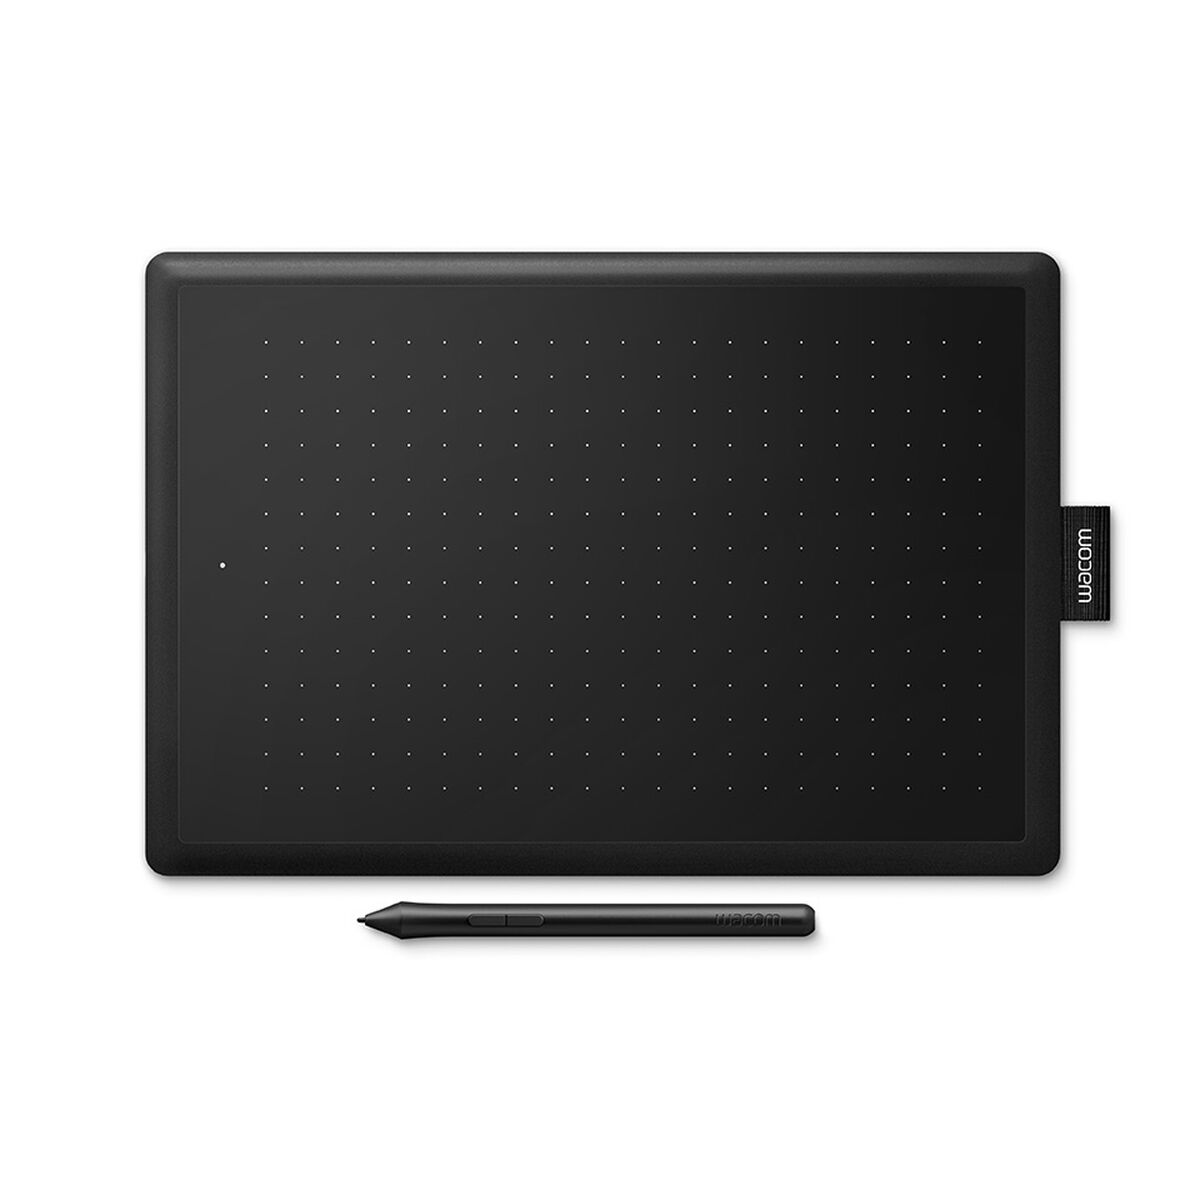 Graphics tablets and pens Wacom CTL-472-S, Wacom, Computing, Accessories, graphics-tablets-and-pens-wacom-ctl-472-s, Brand_Wacom, category-reference-2609, category-reference-2803, category-reference-2812, category-reference-t-19685, category-reference-t-19908, category-reference-t-21353, computers / components, Condition_NEW, Price_50 - 100, Teleworking, RiotNook